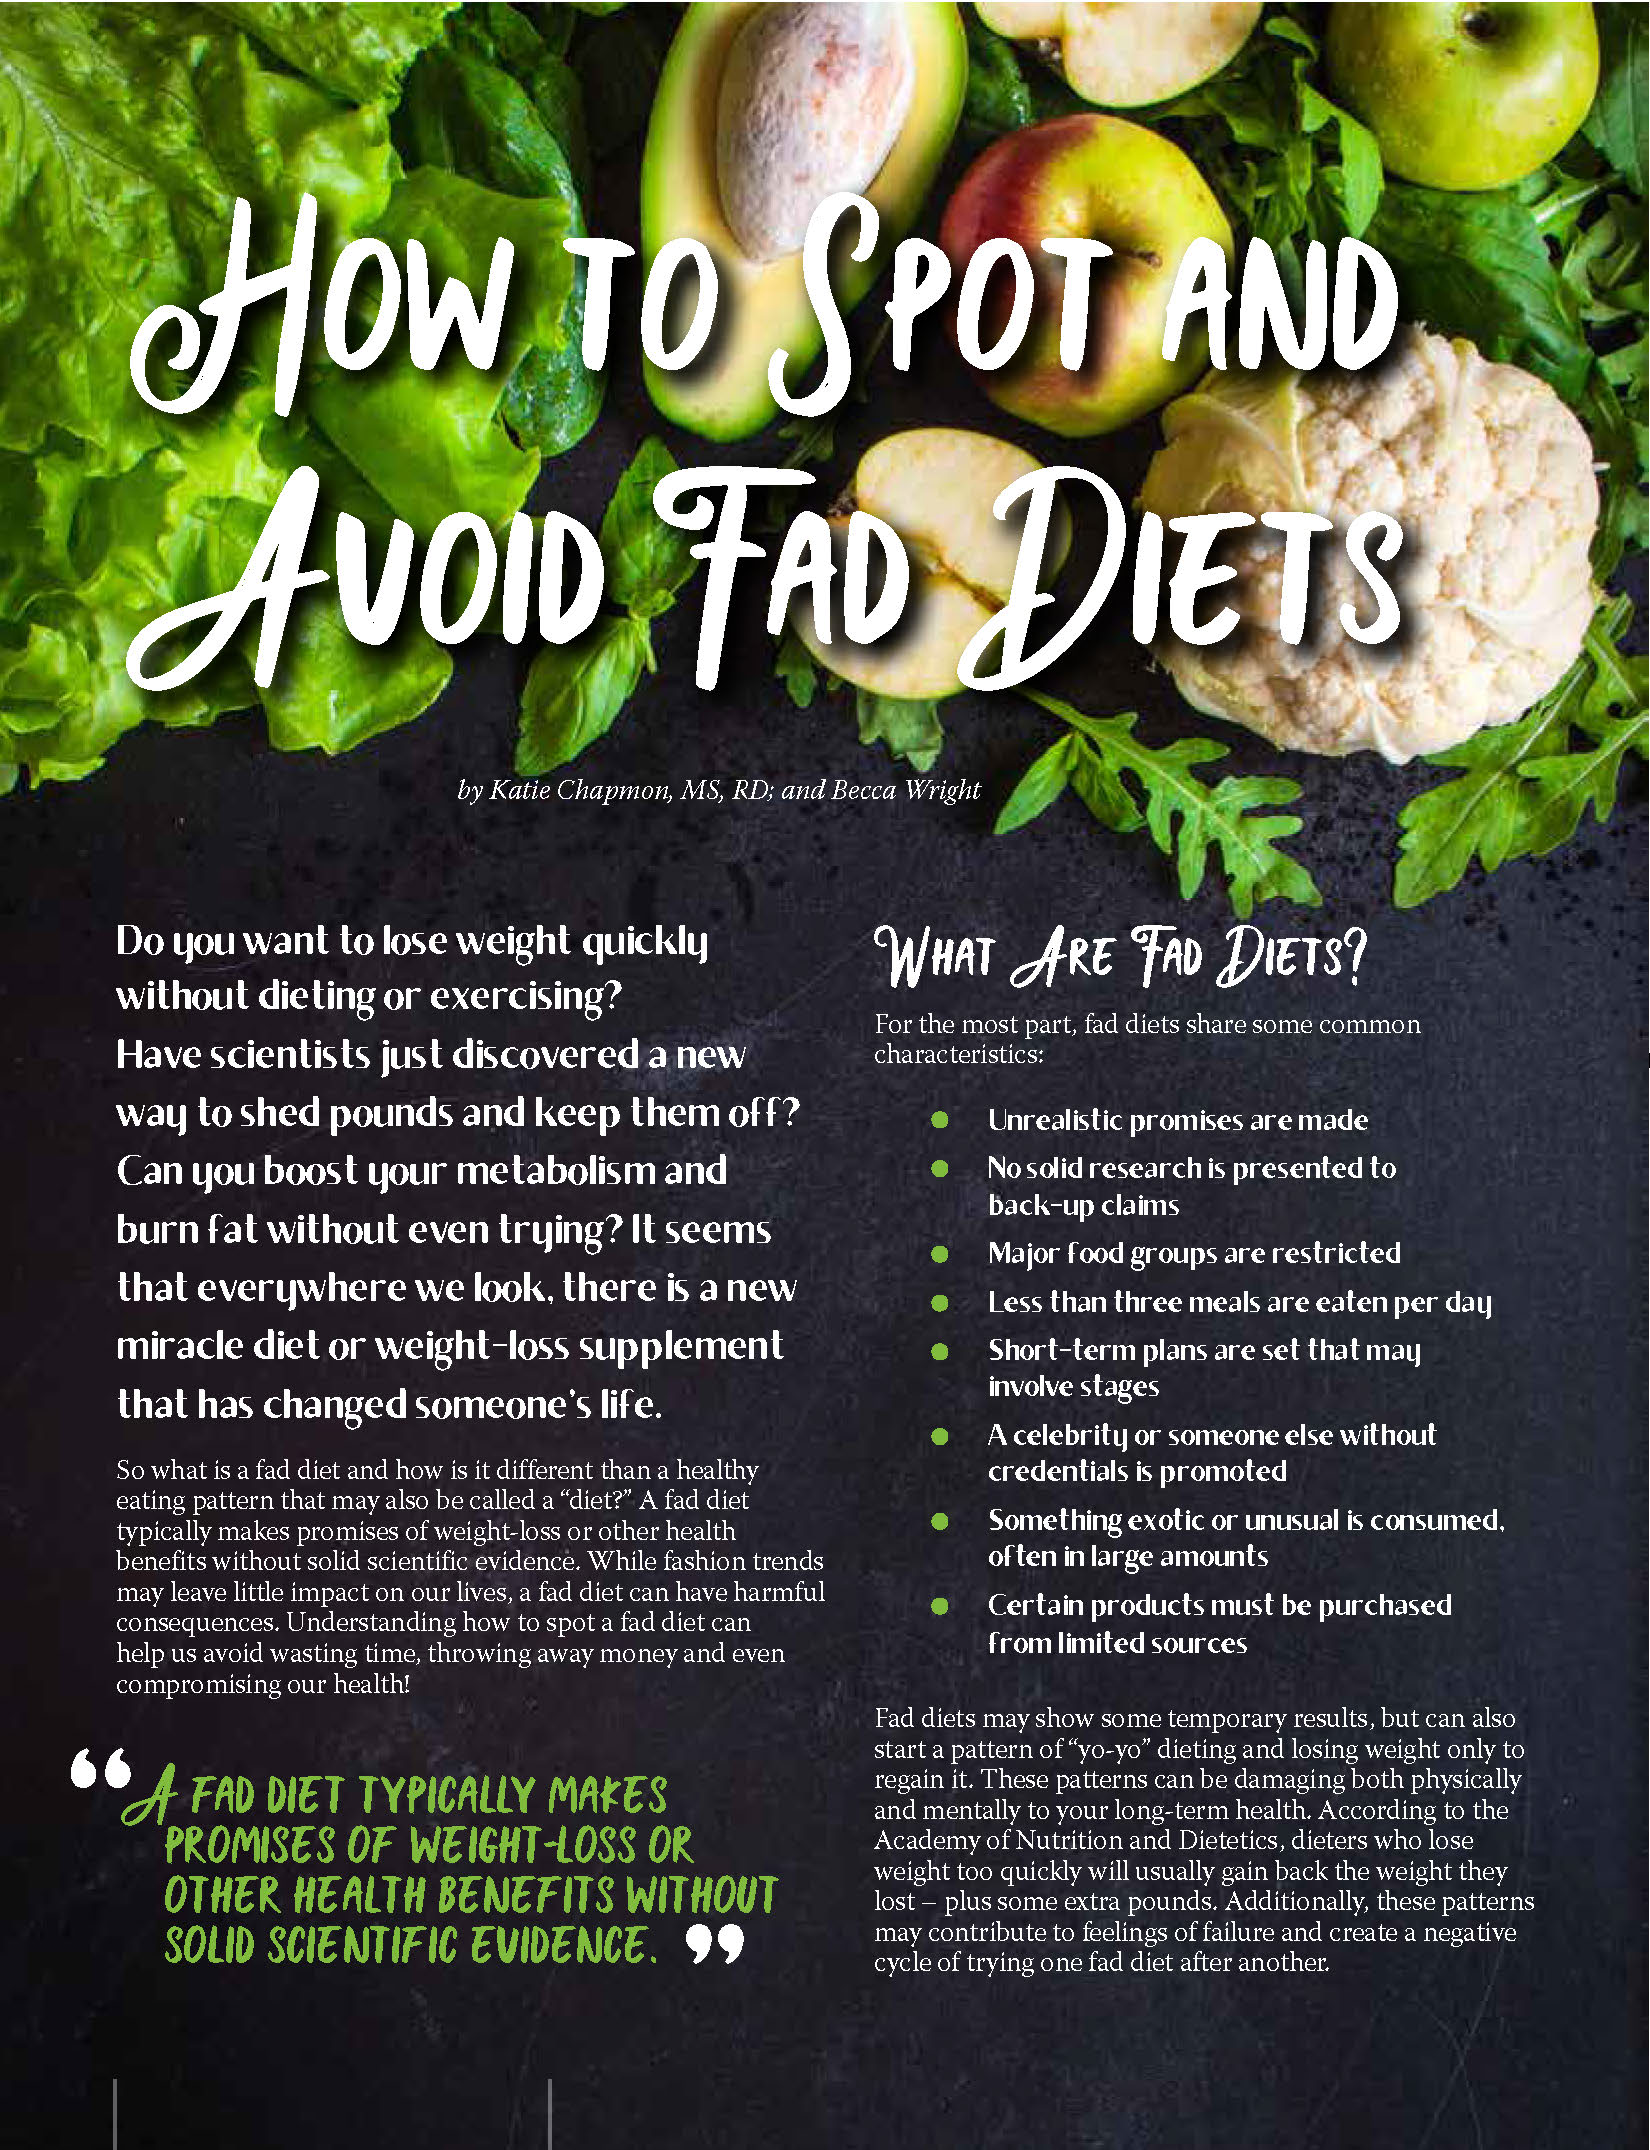 https://www.obesityaction.org/wp-content/uploads/Pages-from-spot-and-avoid-fad-diets.jpg